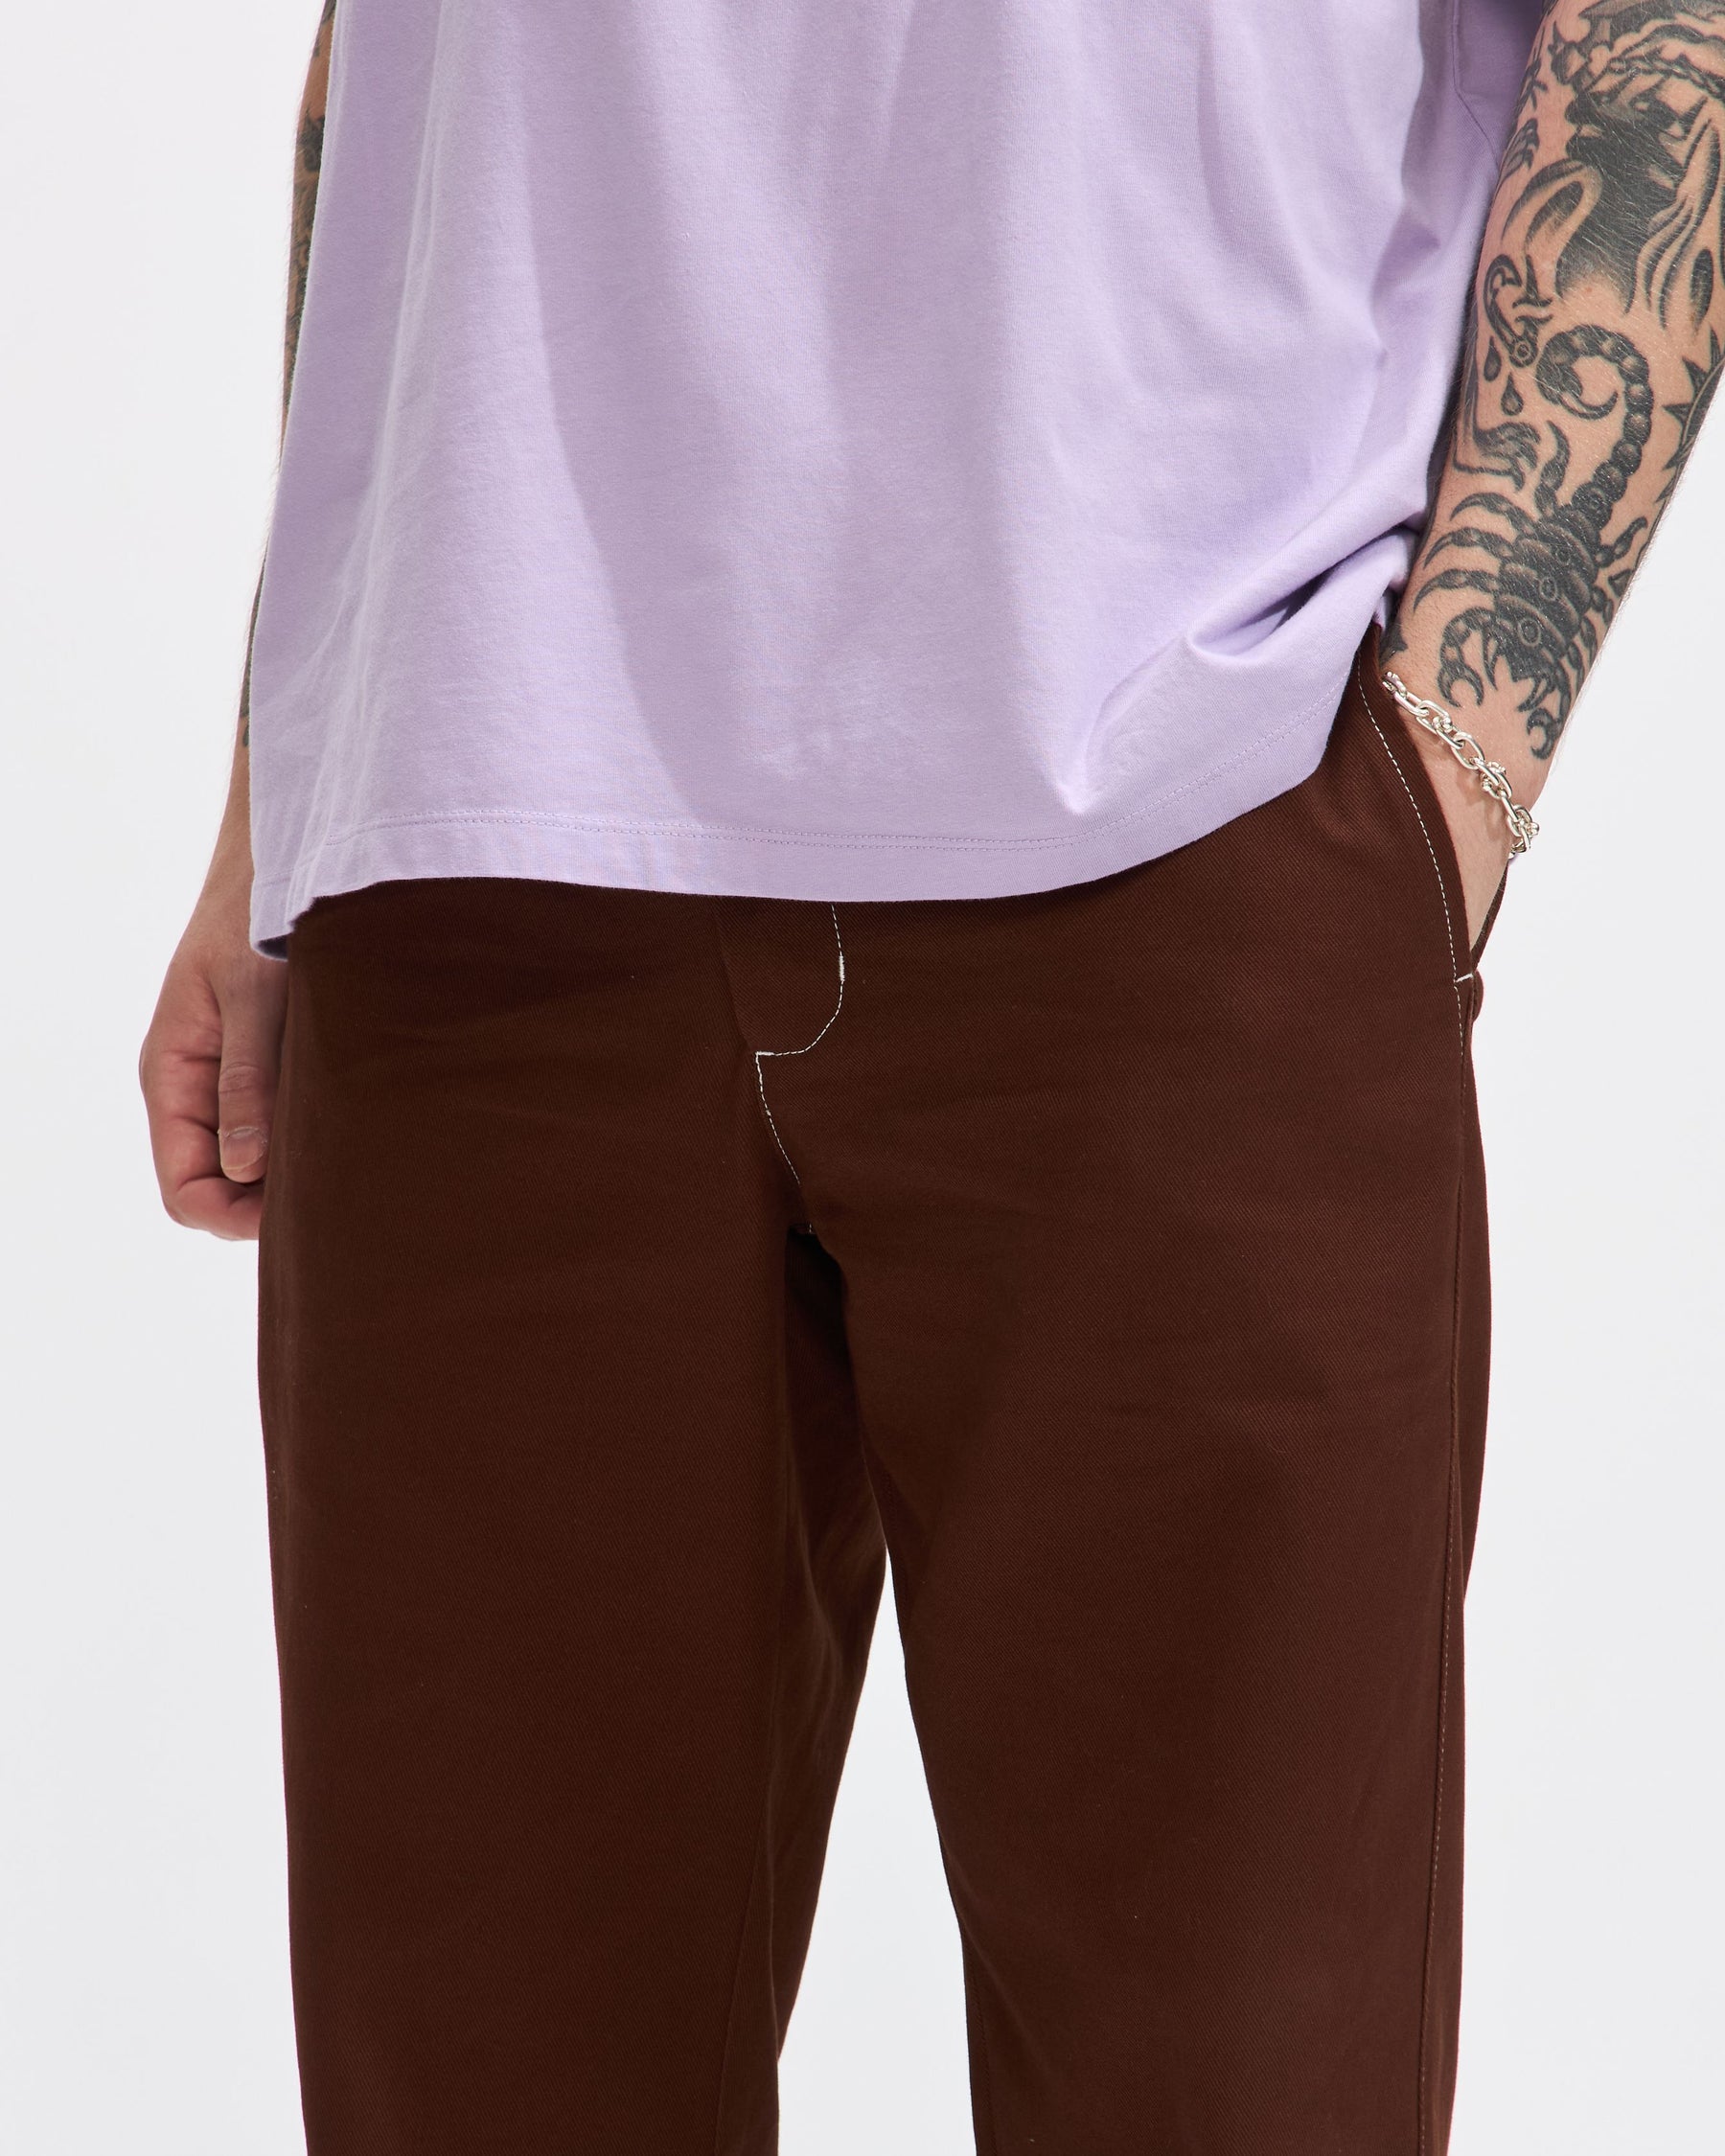 Contrast Stitch Chino Pant in Chocolate